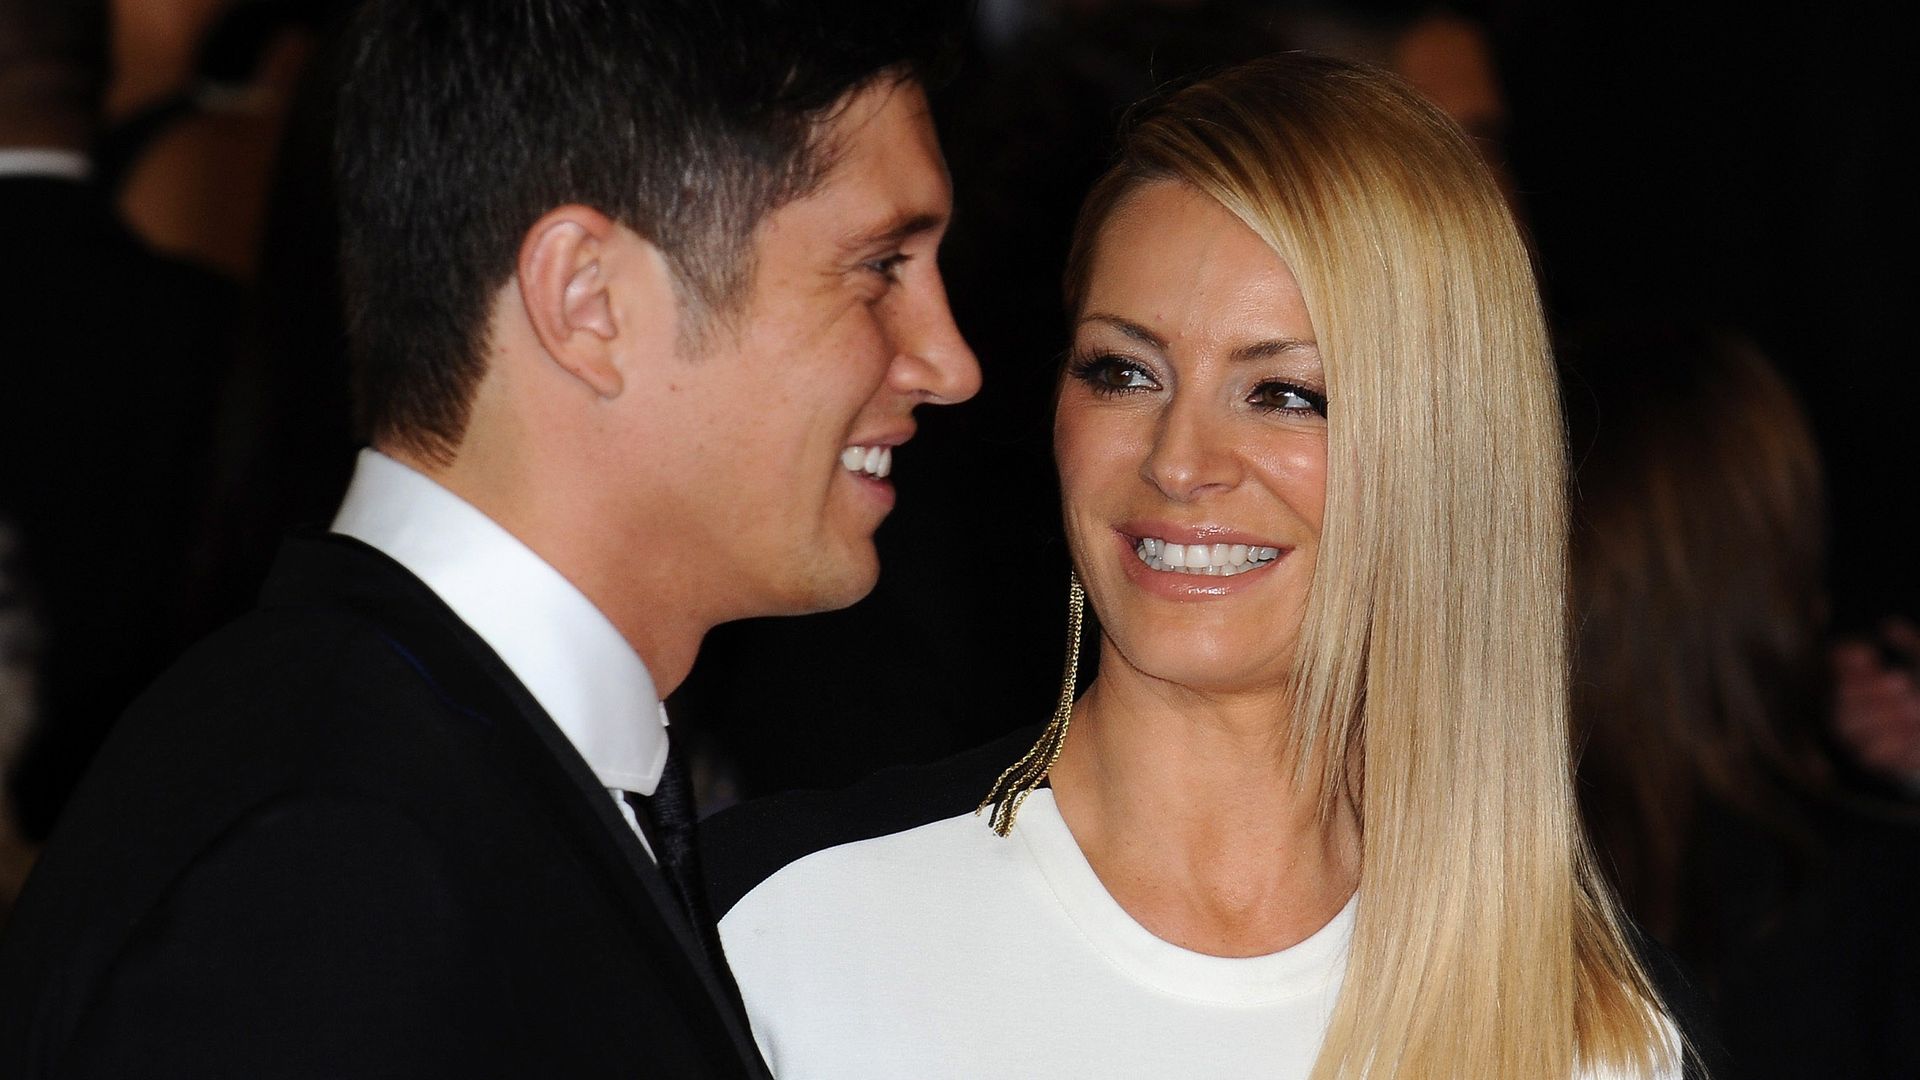 Tess Daly is a smitten bride in intimate wedding moment with Vernon Kay